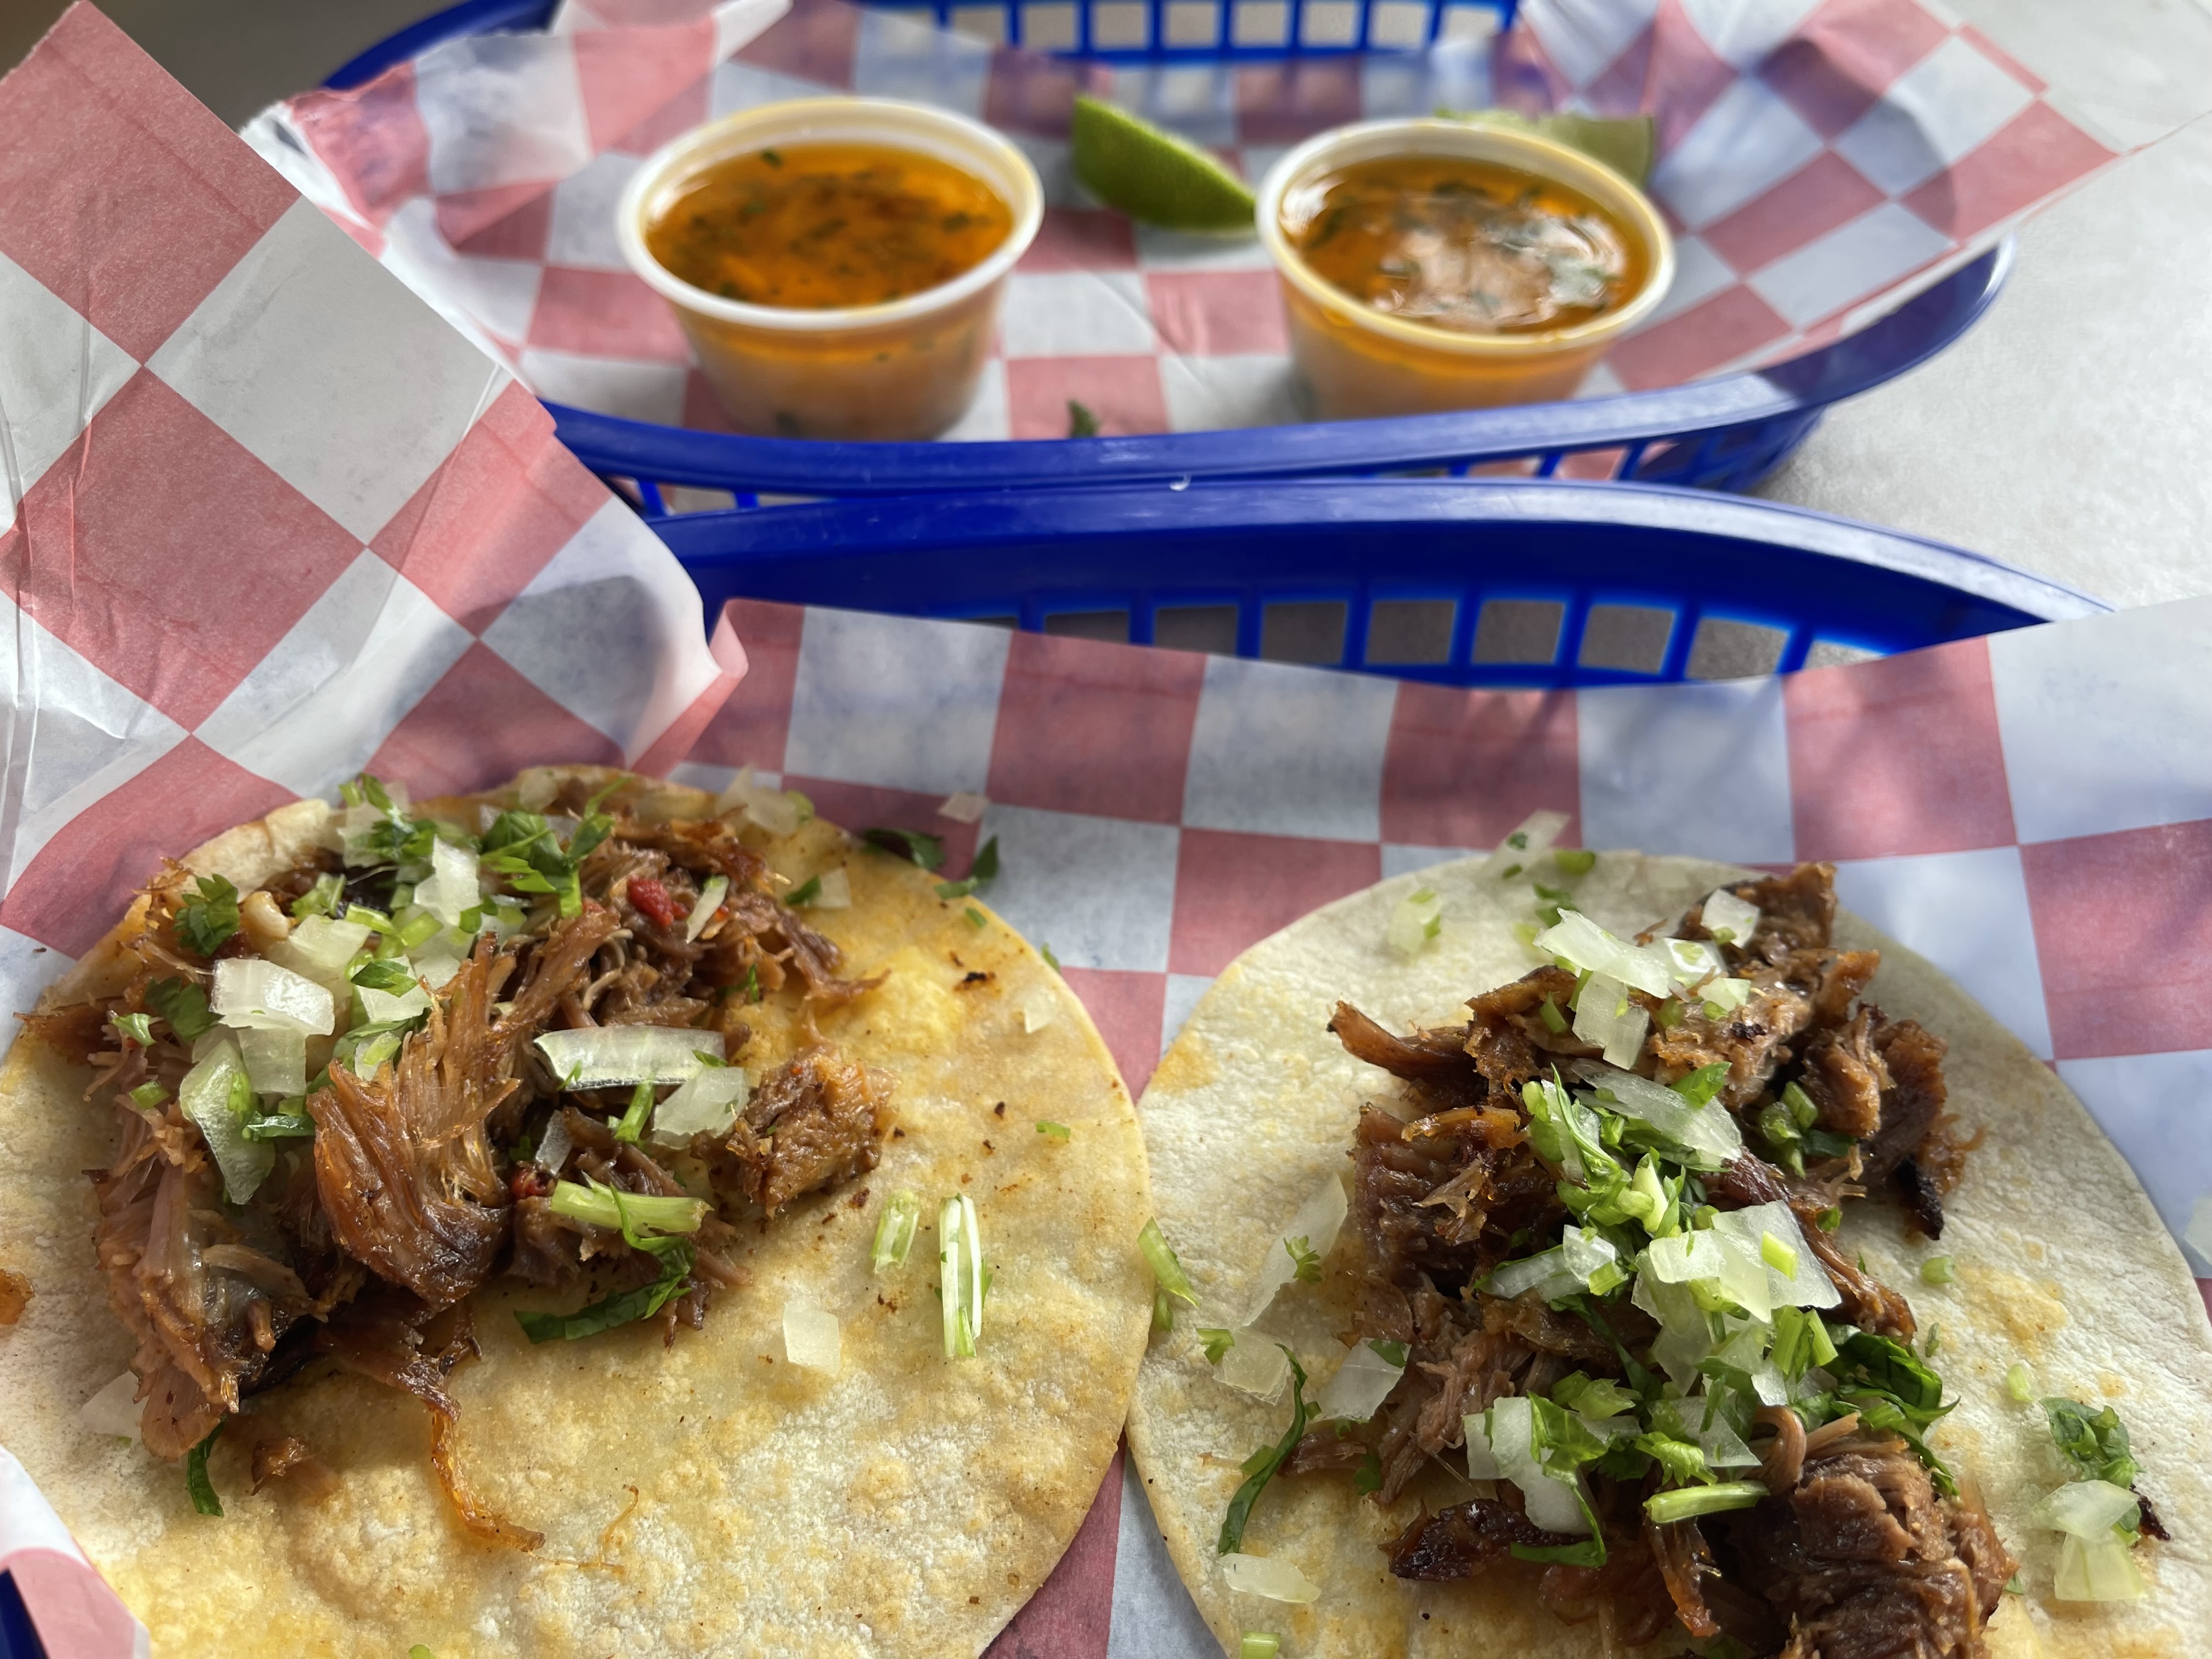 La Oveja Negra Barbacoa De Borrego (Lamb) * Only available Friday, Saturday, and Sunday. Taco’s come with onions, cilantro, limes and the salsa on the house. And, consome comes with garbanzo beans, rice, onion, cilantro, and limes, and salsa.